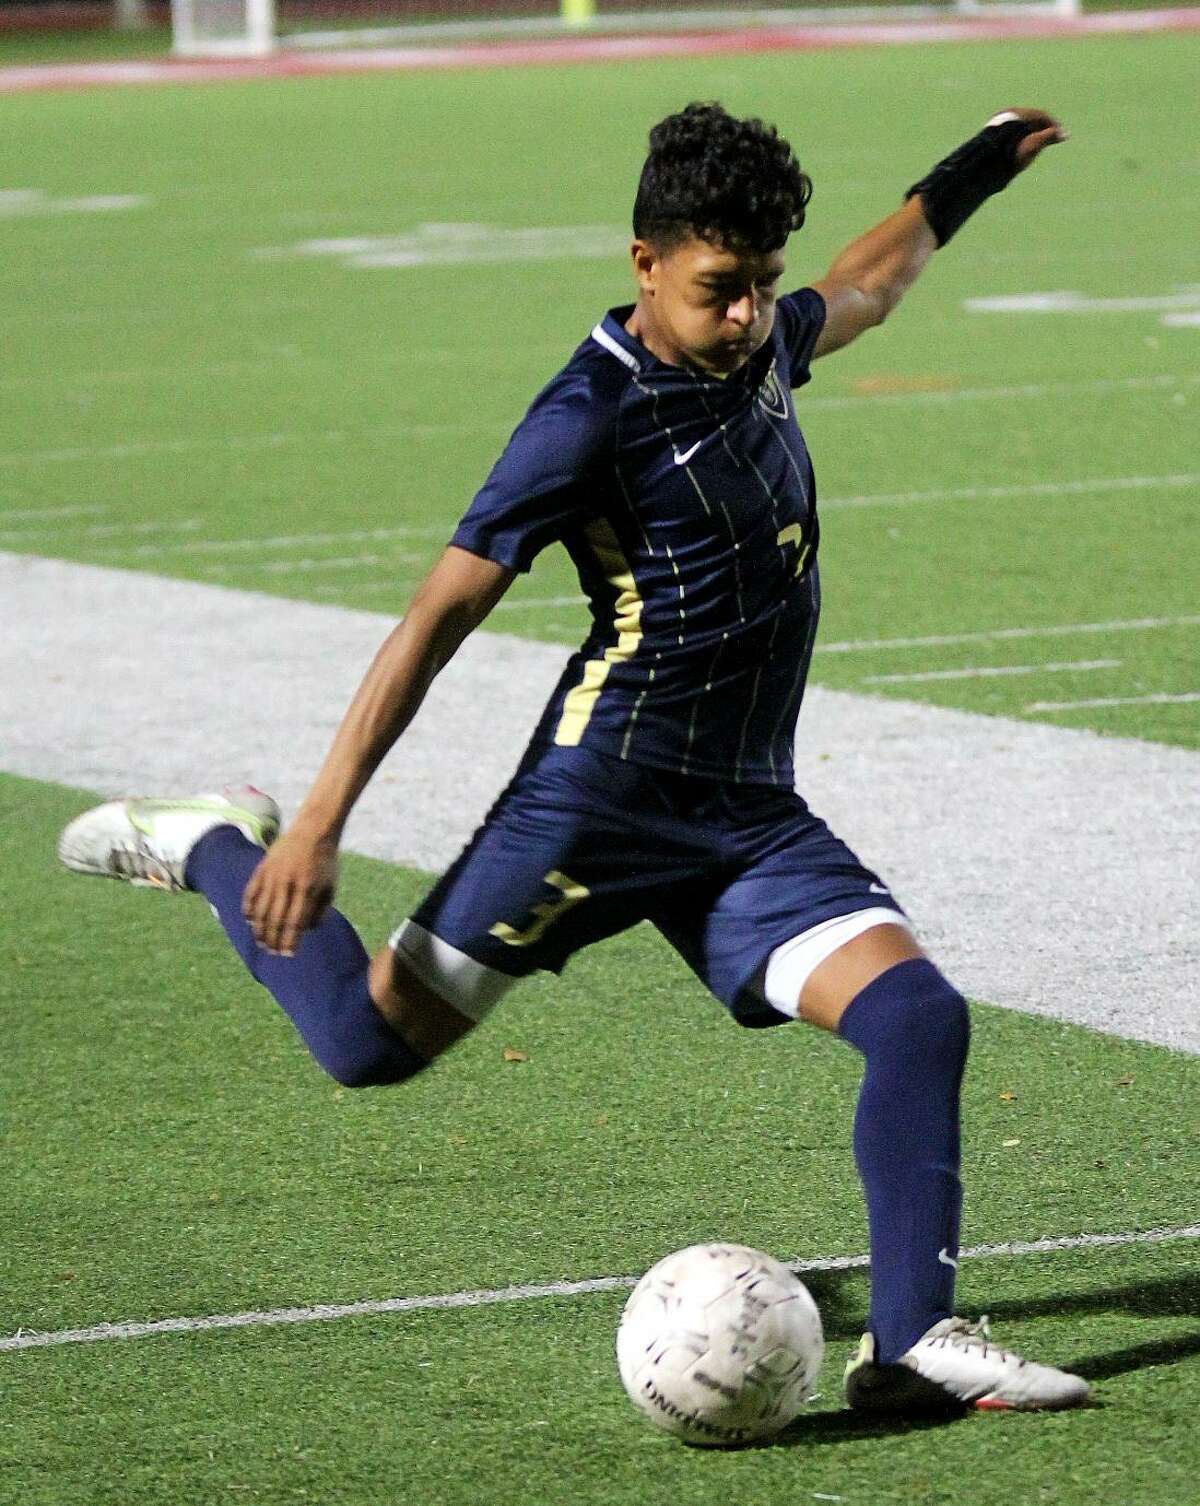 Bailey Medina and the Alexander Bulldogs punched their ticket to the regional semifinals with a 2-1 win over Del Rio on Friday.